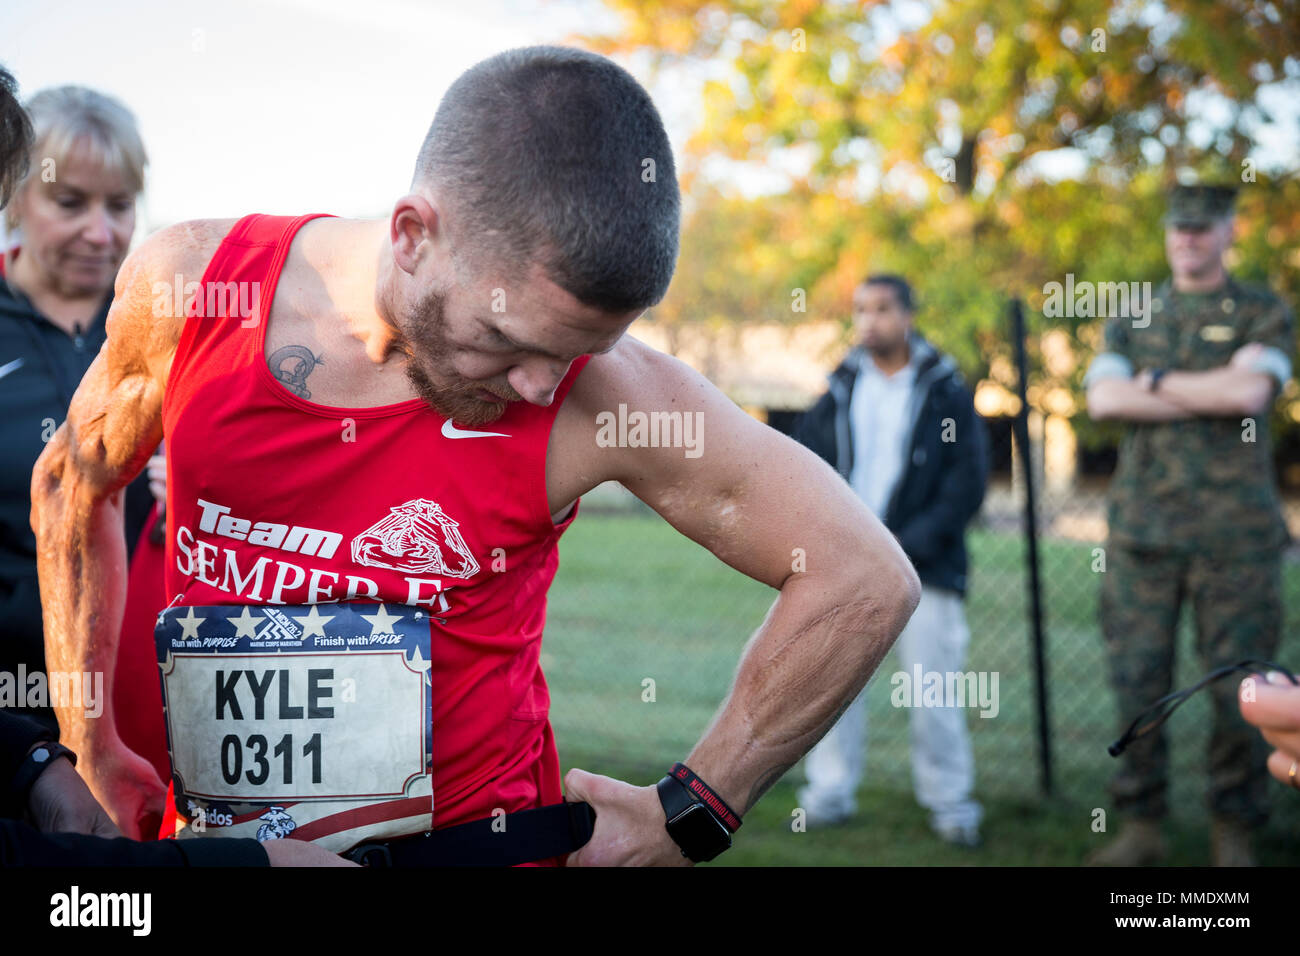 Retired U.S. Marine Corps Cpl. Kyle Carpenter, Medal of Honor recipient, adjusts his uniform prior to the 42nd annual running of the Marine Corps Marathon, traveling on a monumental course through Washington, D.C. and finishing at the Marine Corps War Memorial, Arlington, Va., Oct. 22, 2017. Also known as 'The People's Marathon,' the 26.2 mile race drew roughly 30,000 participants to promote physical fitness, generate goodwill in the community, and showcase the organizational skills of the Marine Corps. (U.S. Marine Corps photo by Sgt. Timothy Turner) Stock Photo